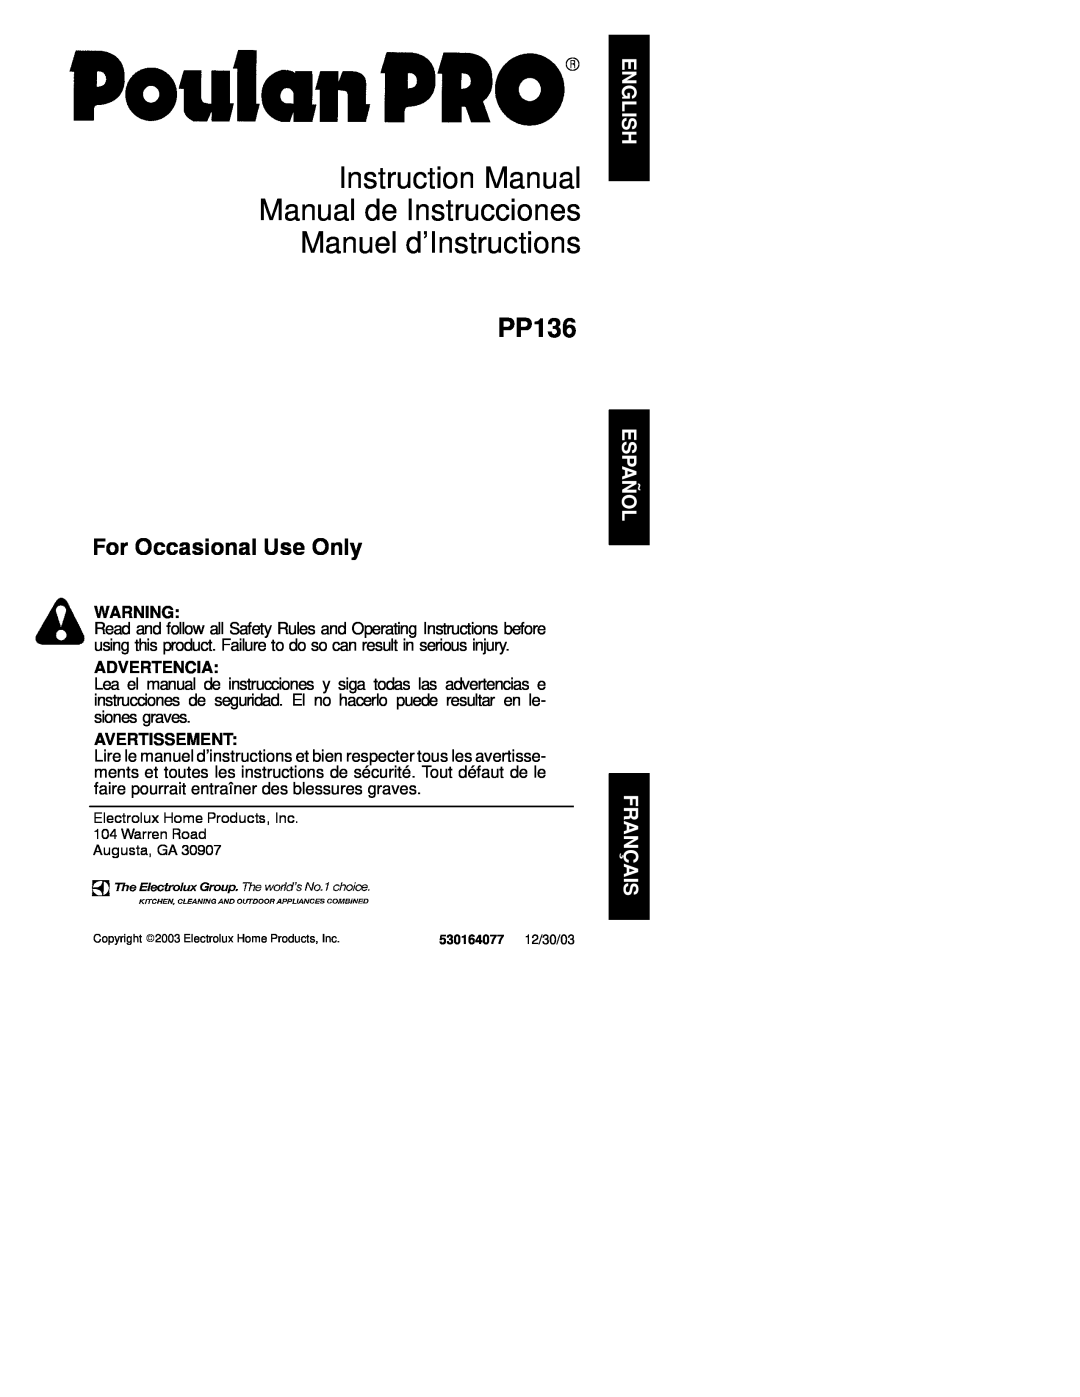 Poulan PP136 instruction manual Advertencia, Avertissement, For Occasional Use Only 